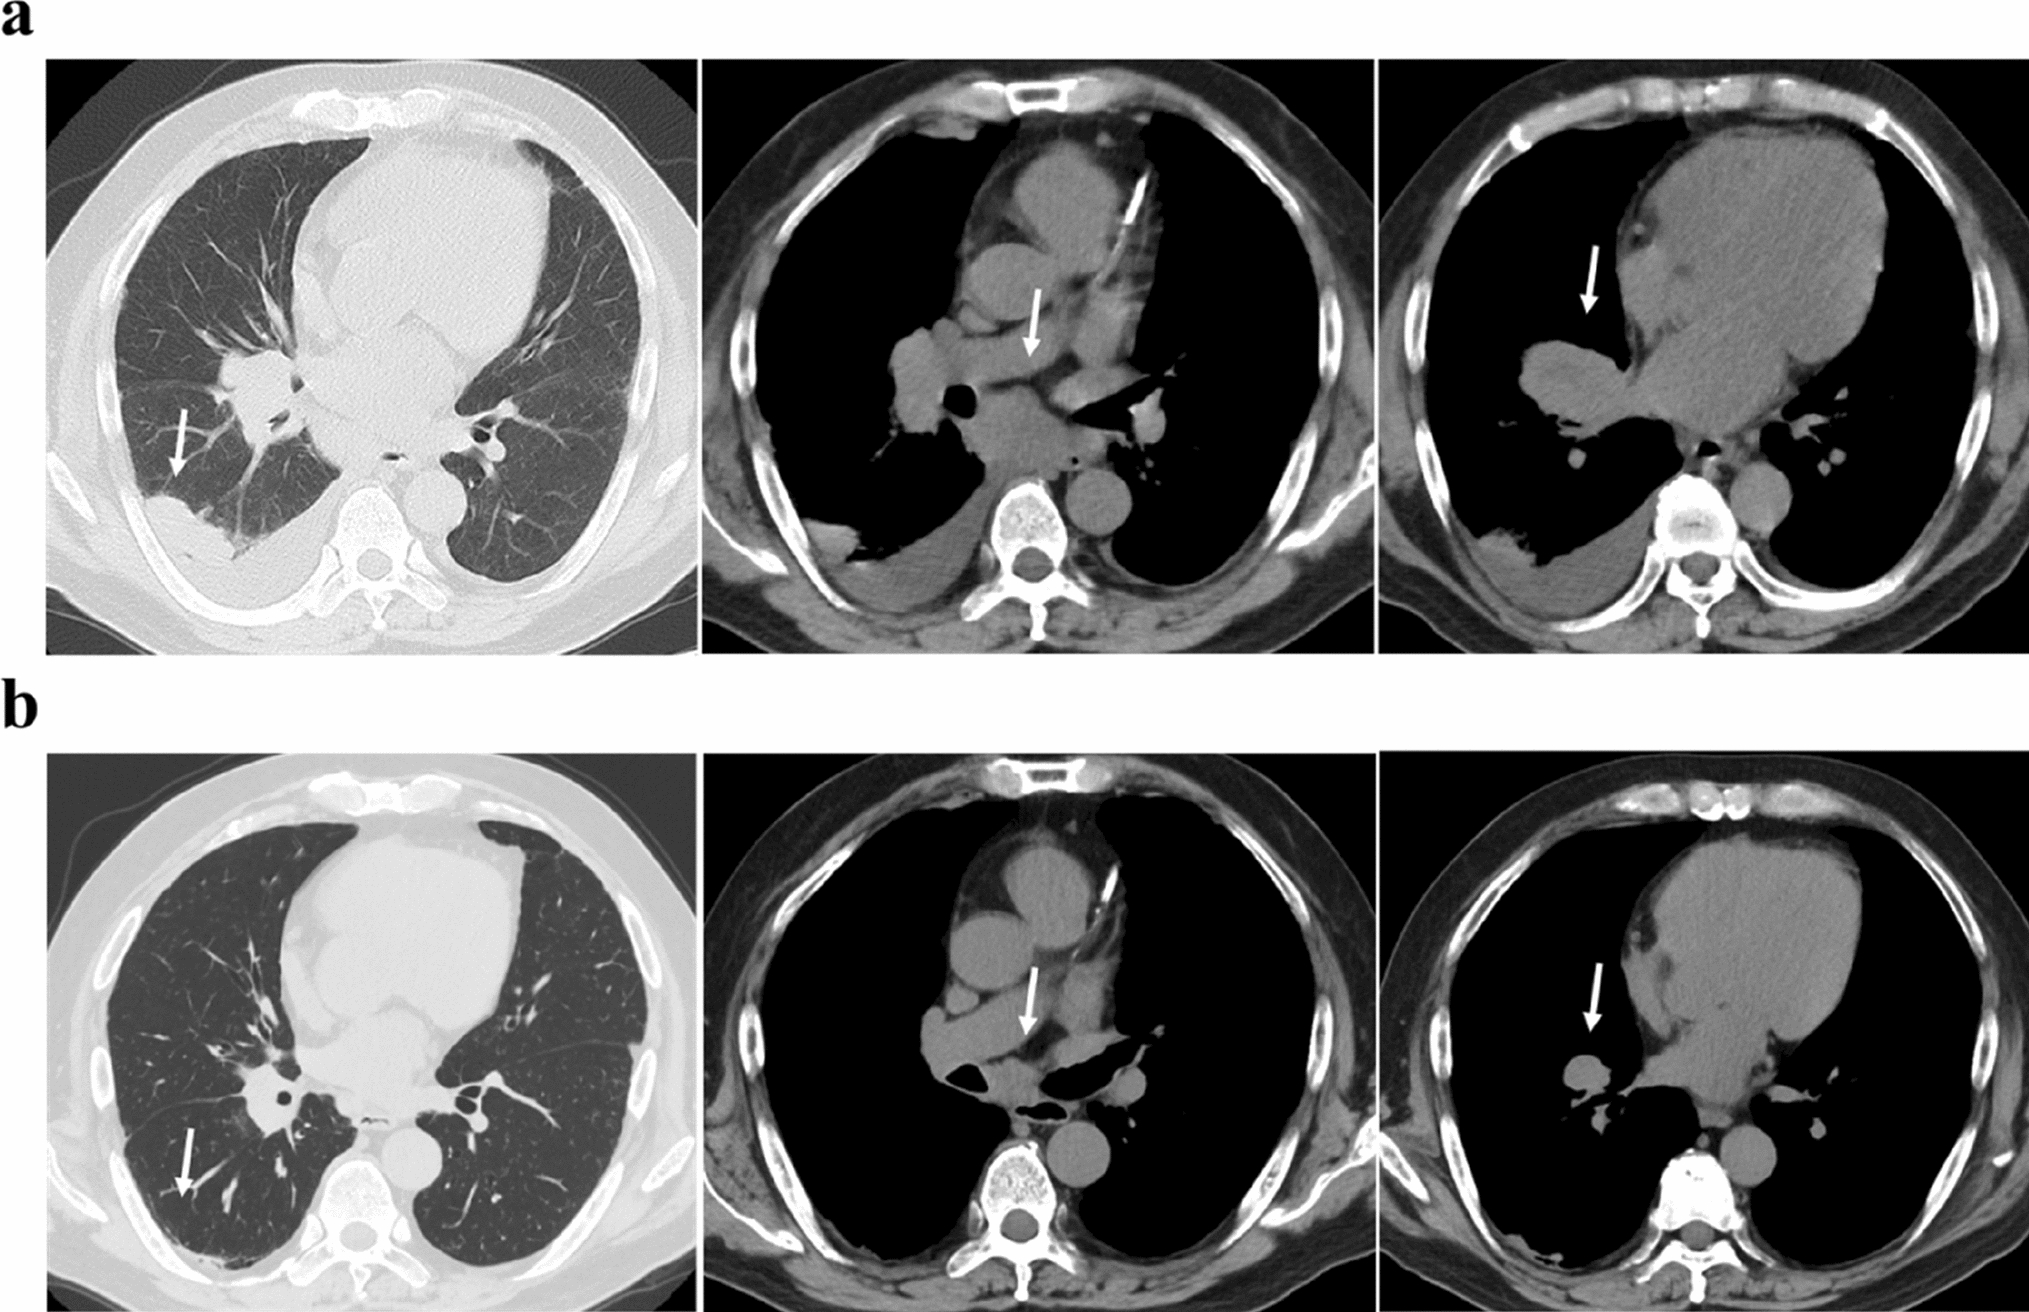 Durvalumab plus carboplatin-etoposide treatment in a patient with small-cell lung cancer on hemodialysis: a case report and literature review